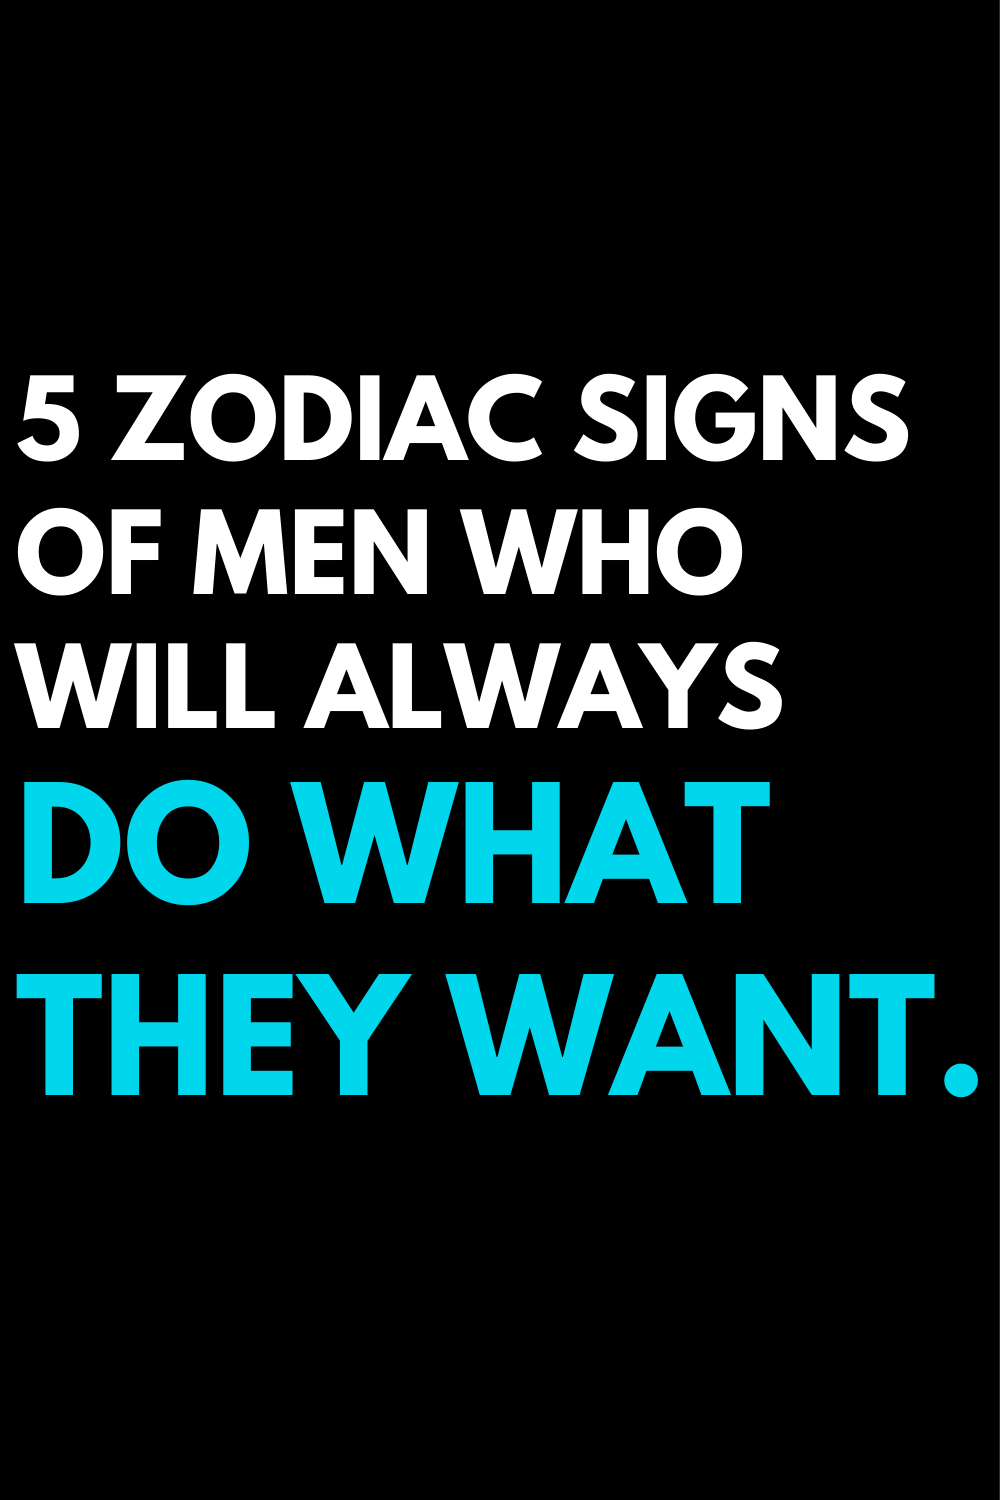 5 zodiac signs of men who will always do what they want.